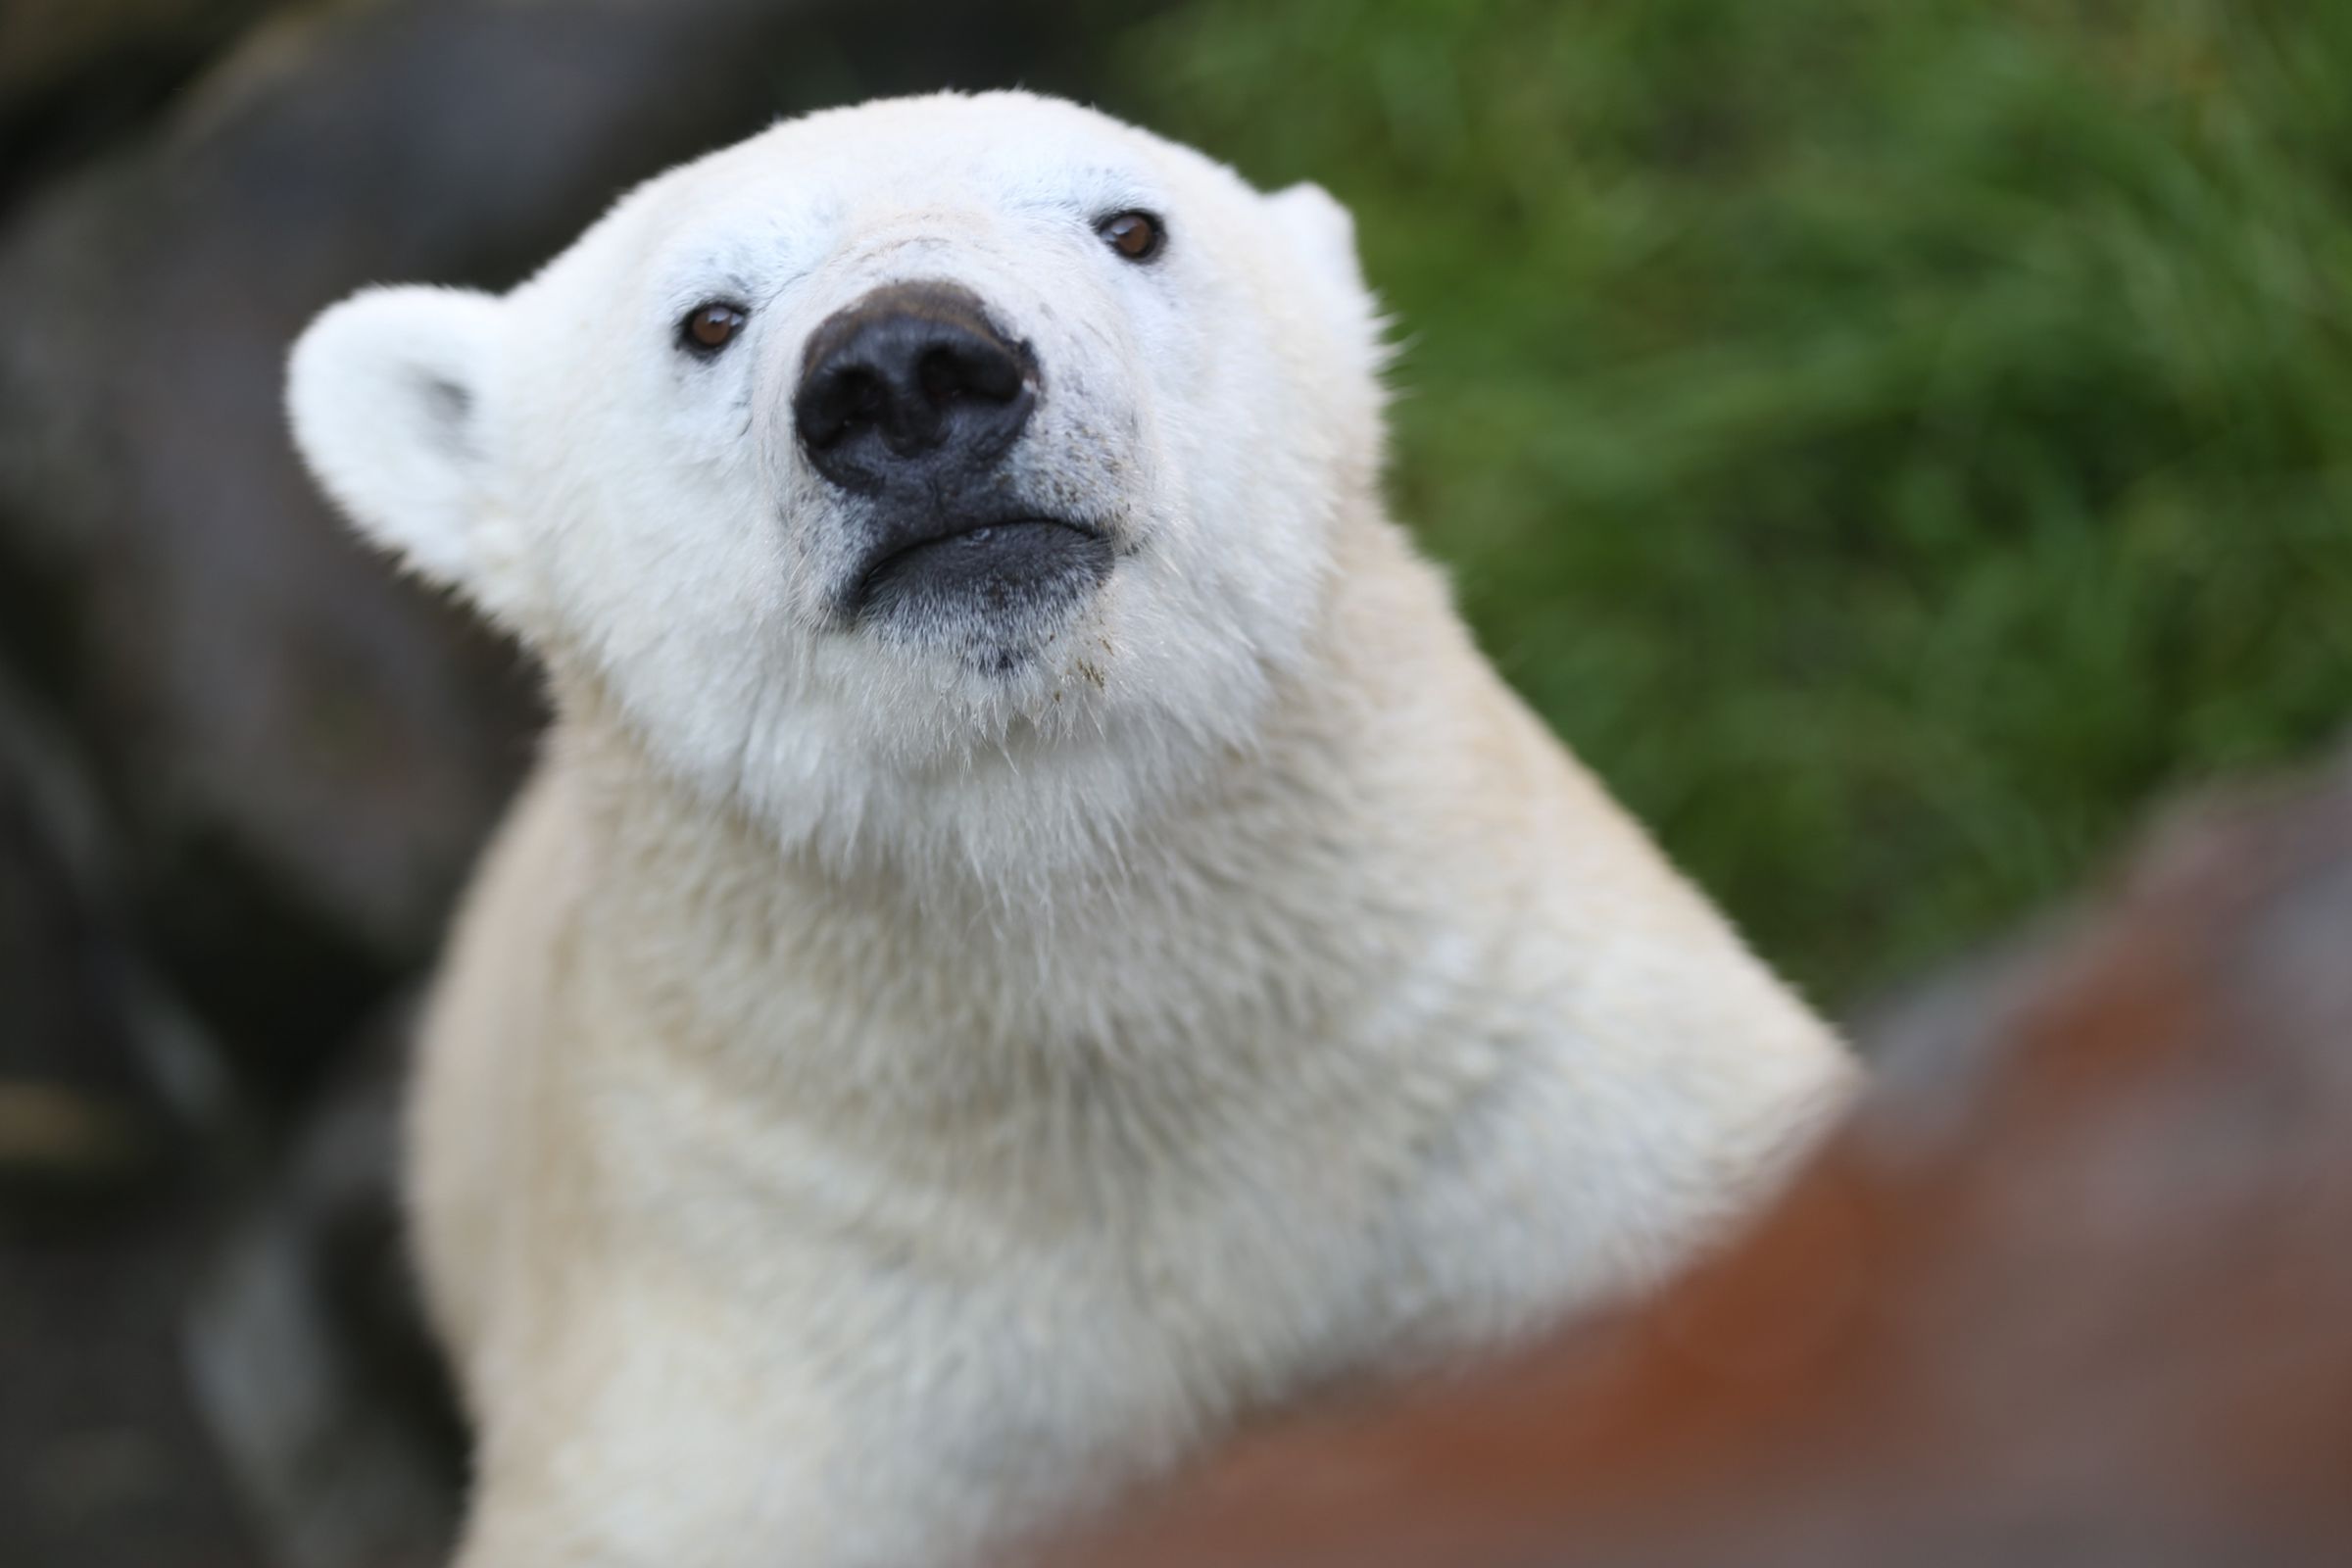 Nora at the Oregon Zoo in 2017. Her father, Nanuq, was born near Wales, Alaska, where warming temperatures threaten the livelihoods of both polar bears and native people who depend on seasonal ice sheets for hunting.